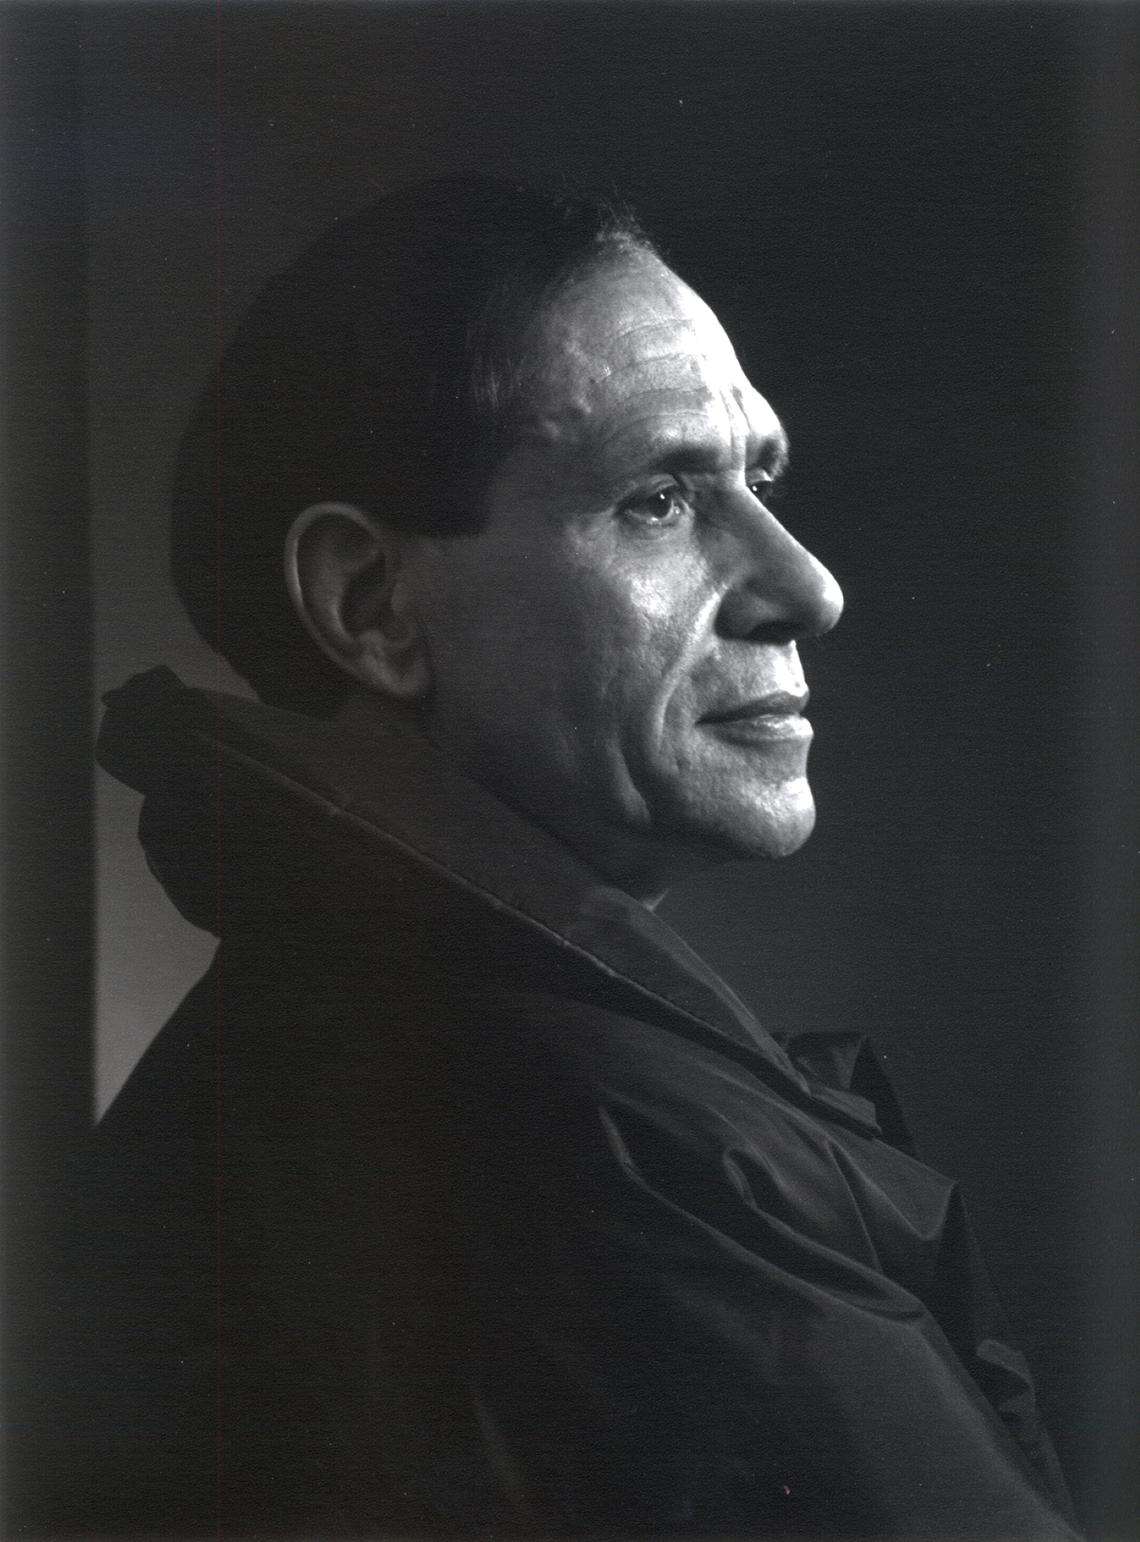 Keynote speaker Douglas Cardinal will be joined in the panel discussion at the University of Calgary by six Indigenous designers and educators, including four Faculty of Environmental Design alumni. Yousuf Karsh photo courtesy Douglas Cardinal